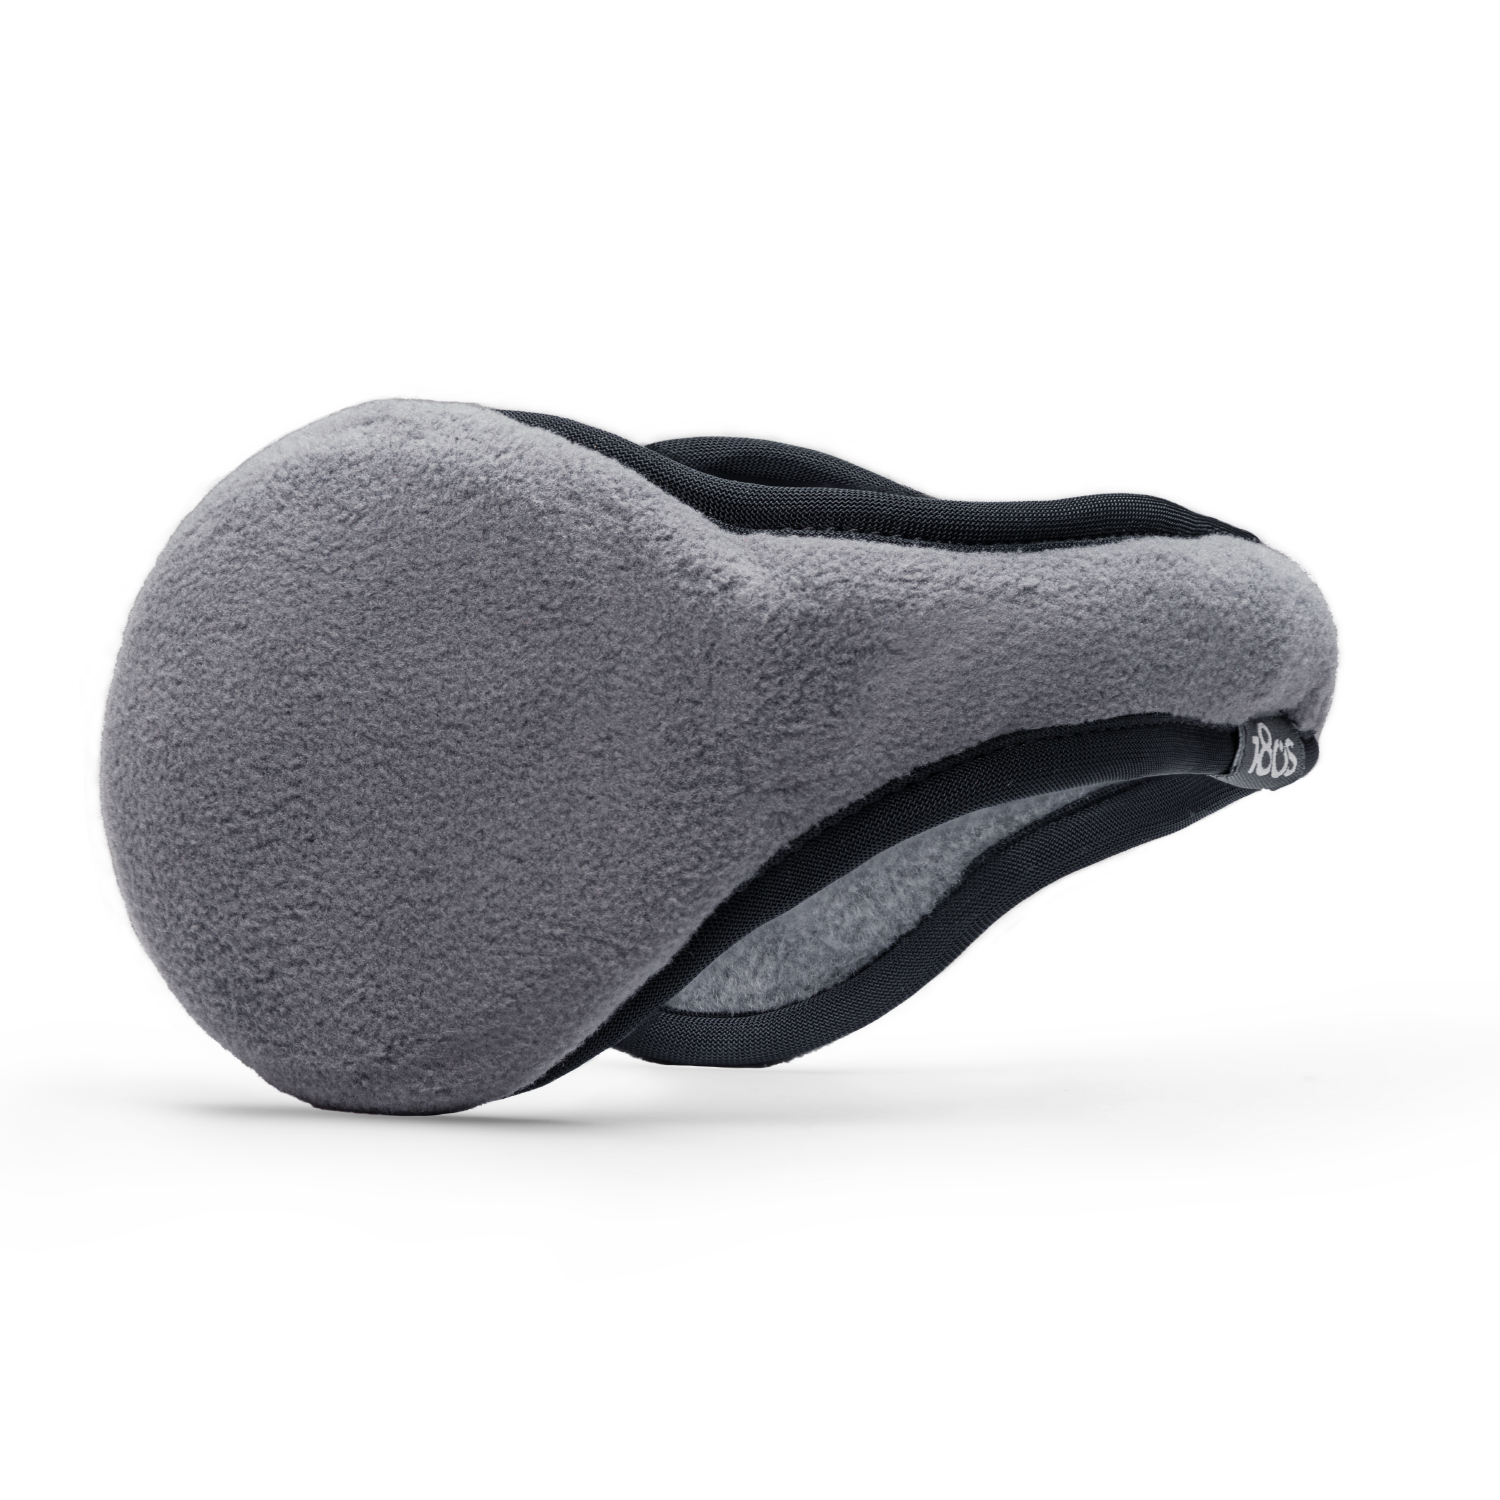 180s Tec Fleece Ear Warmer, Black, One Size at  Men's Clothing store:  Cold Weather Earmuffs